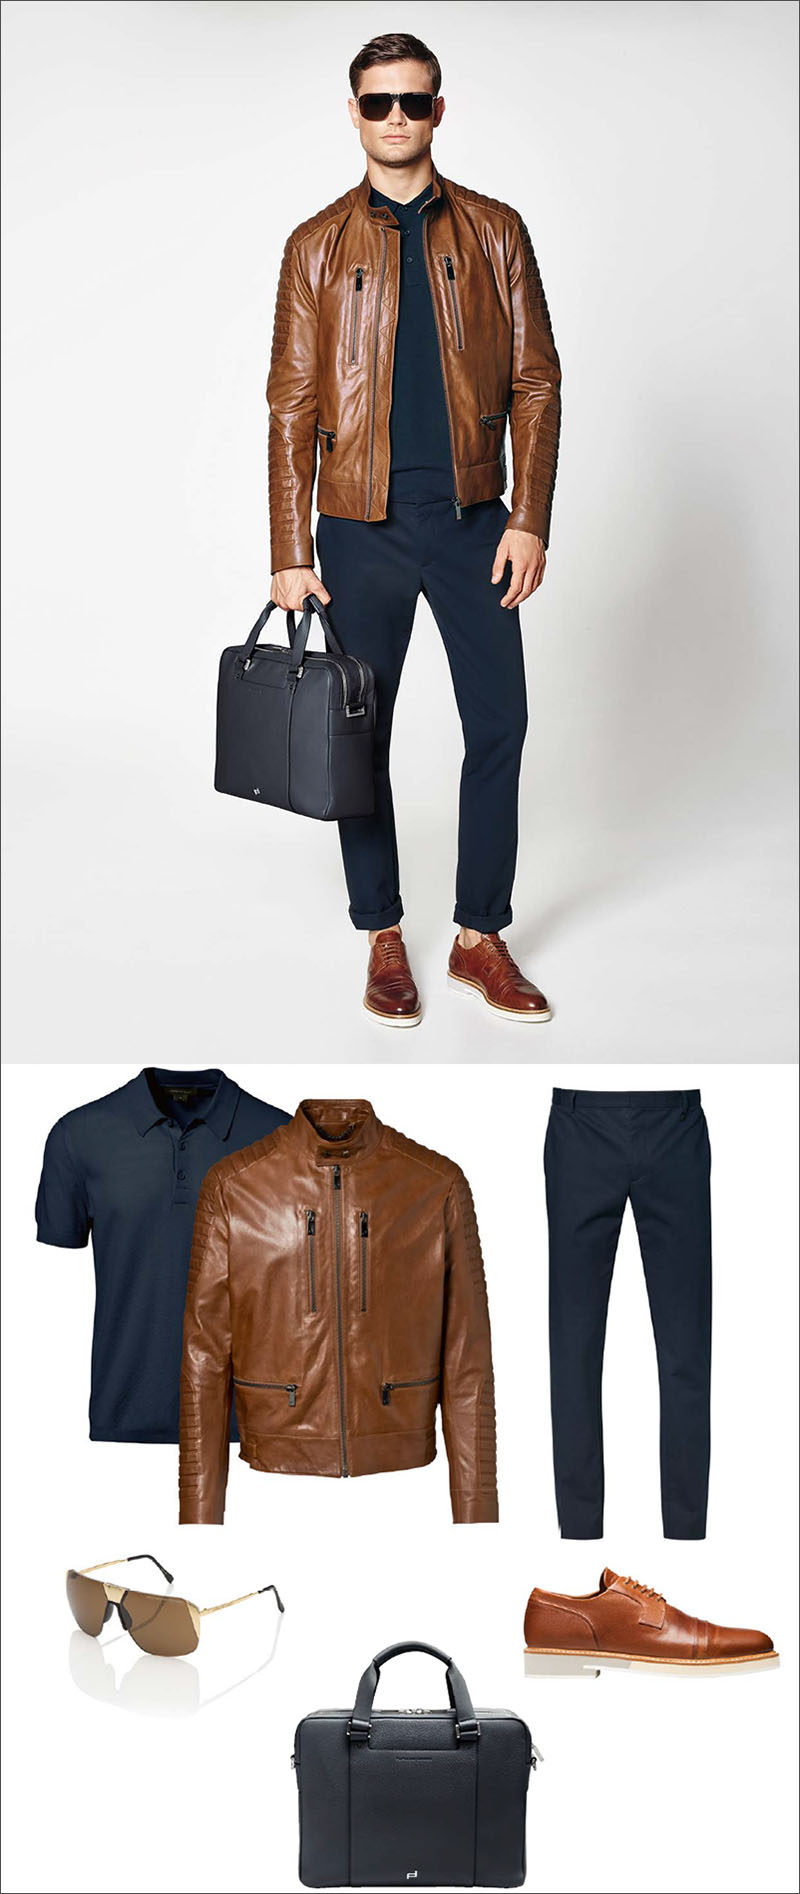 Men's Fashion Ideas - 17 Men's Outfits From Porsche Design's 2017 Spring/Summer Collection | A brown leather jacket and matching brown leather shoes pair with navy cotton pants, a navy polo, a navy briefcase, and gold sunglasses to complete this stylish men's outfit.